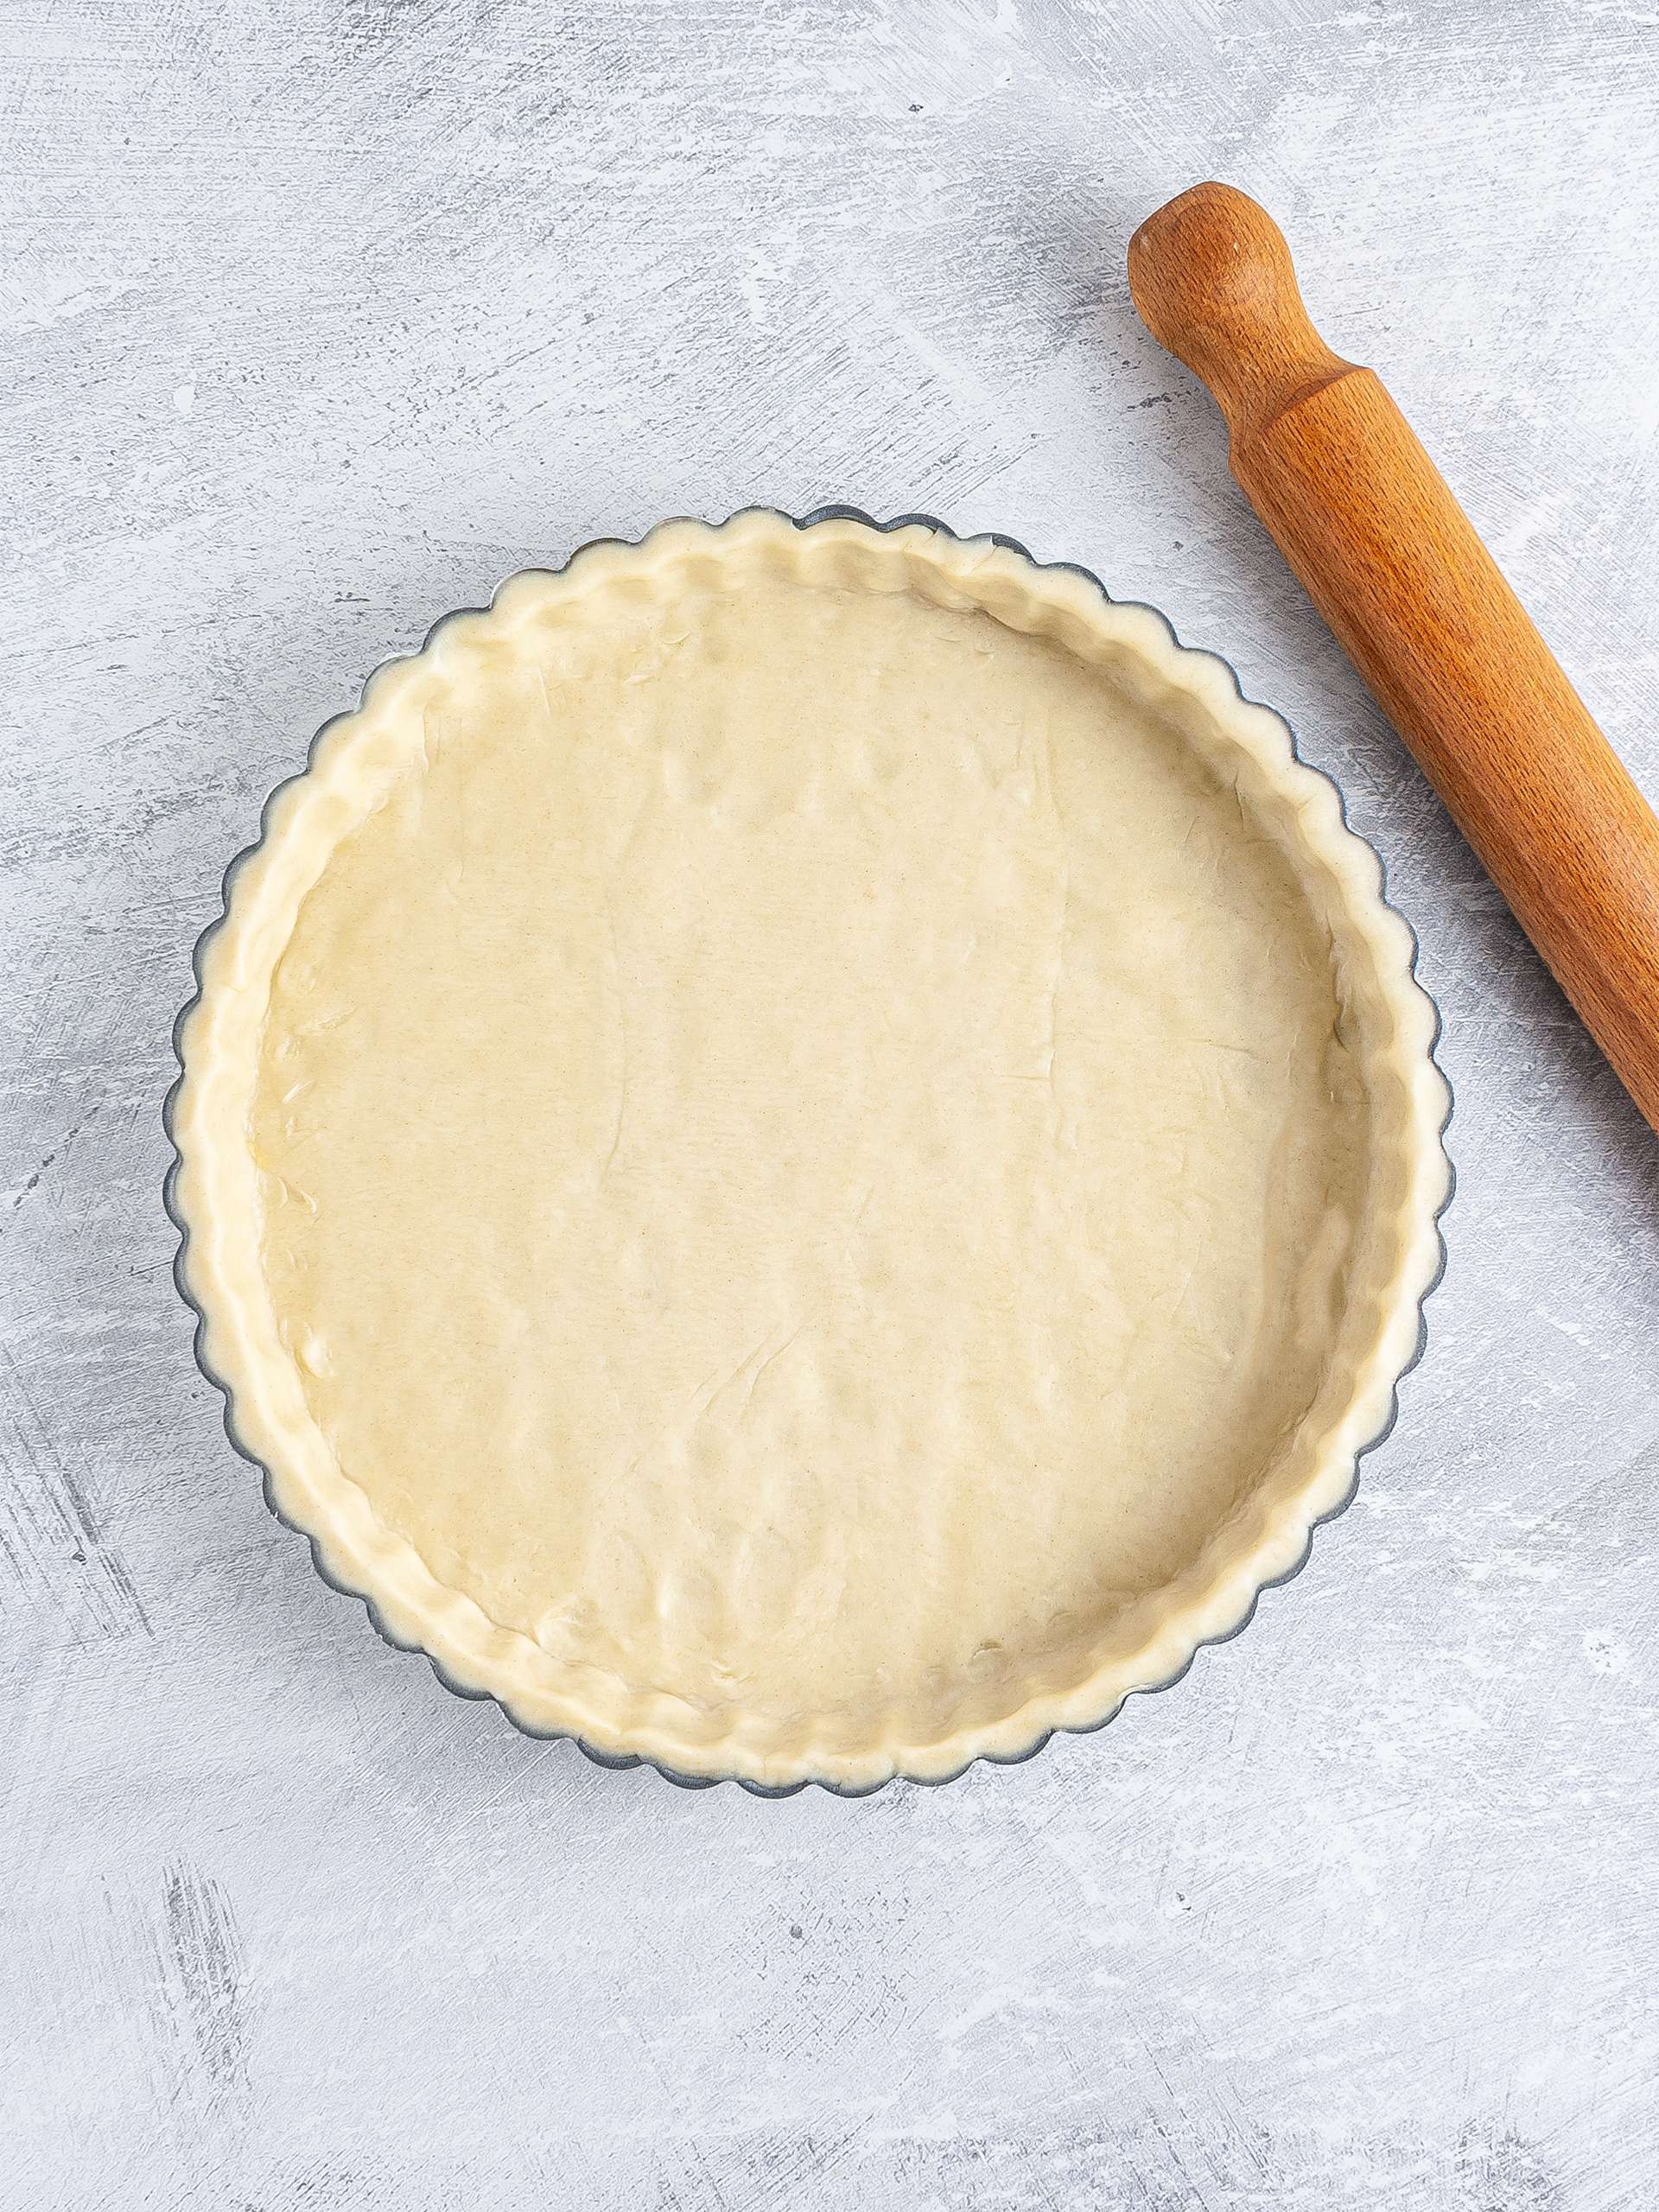 Shortcrust pastry in a pie dish